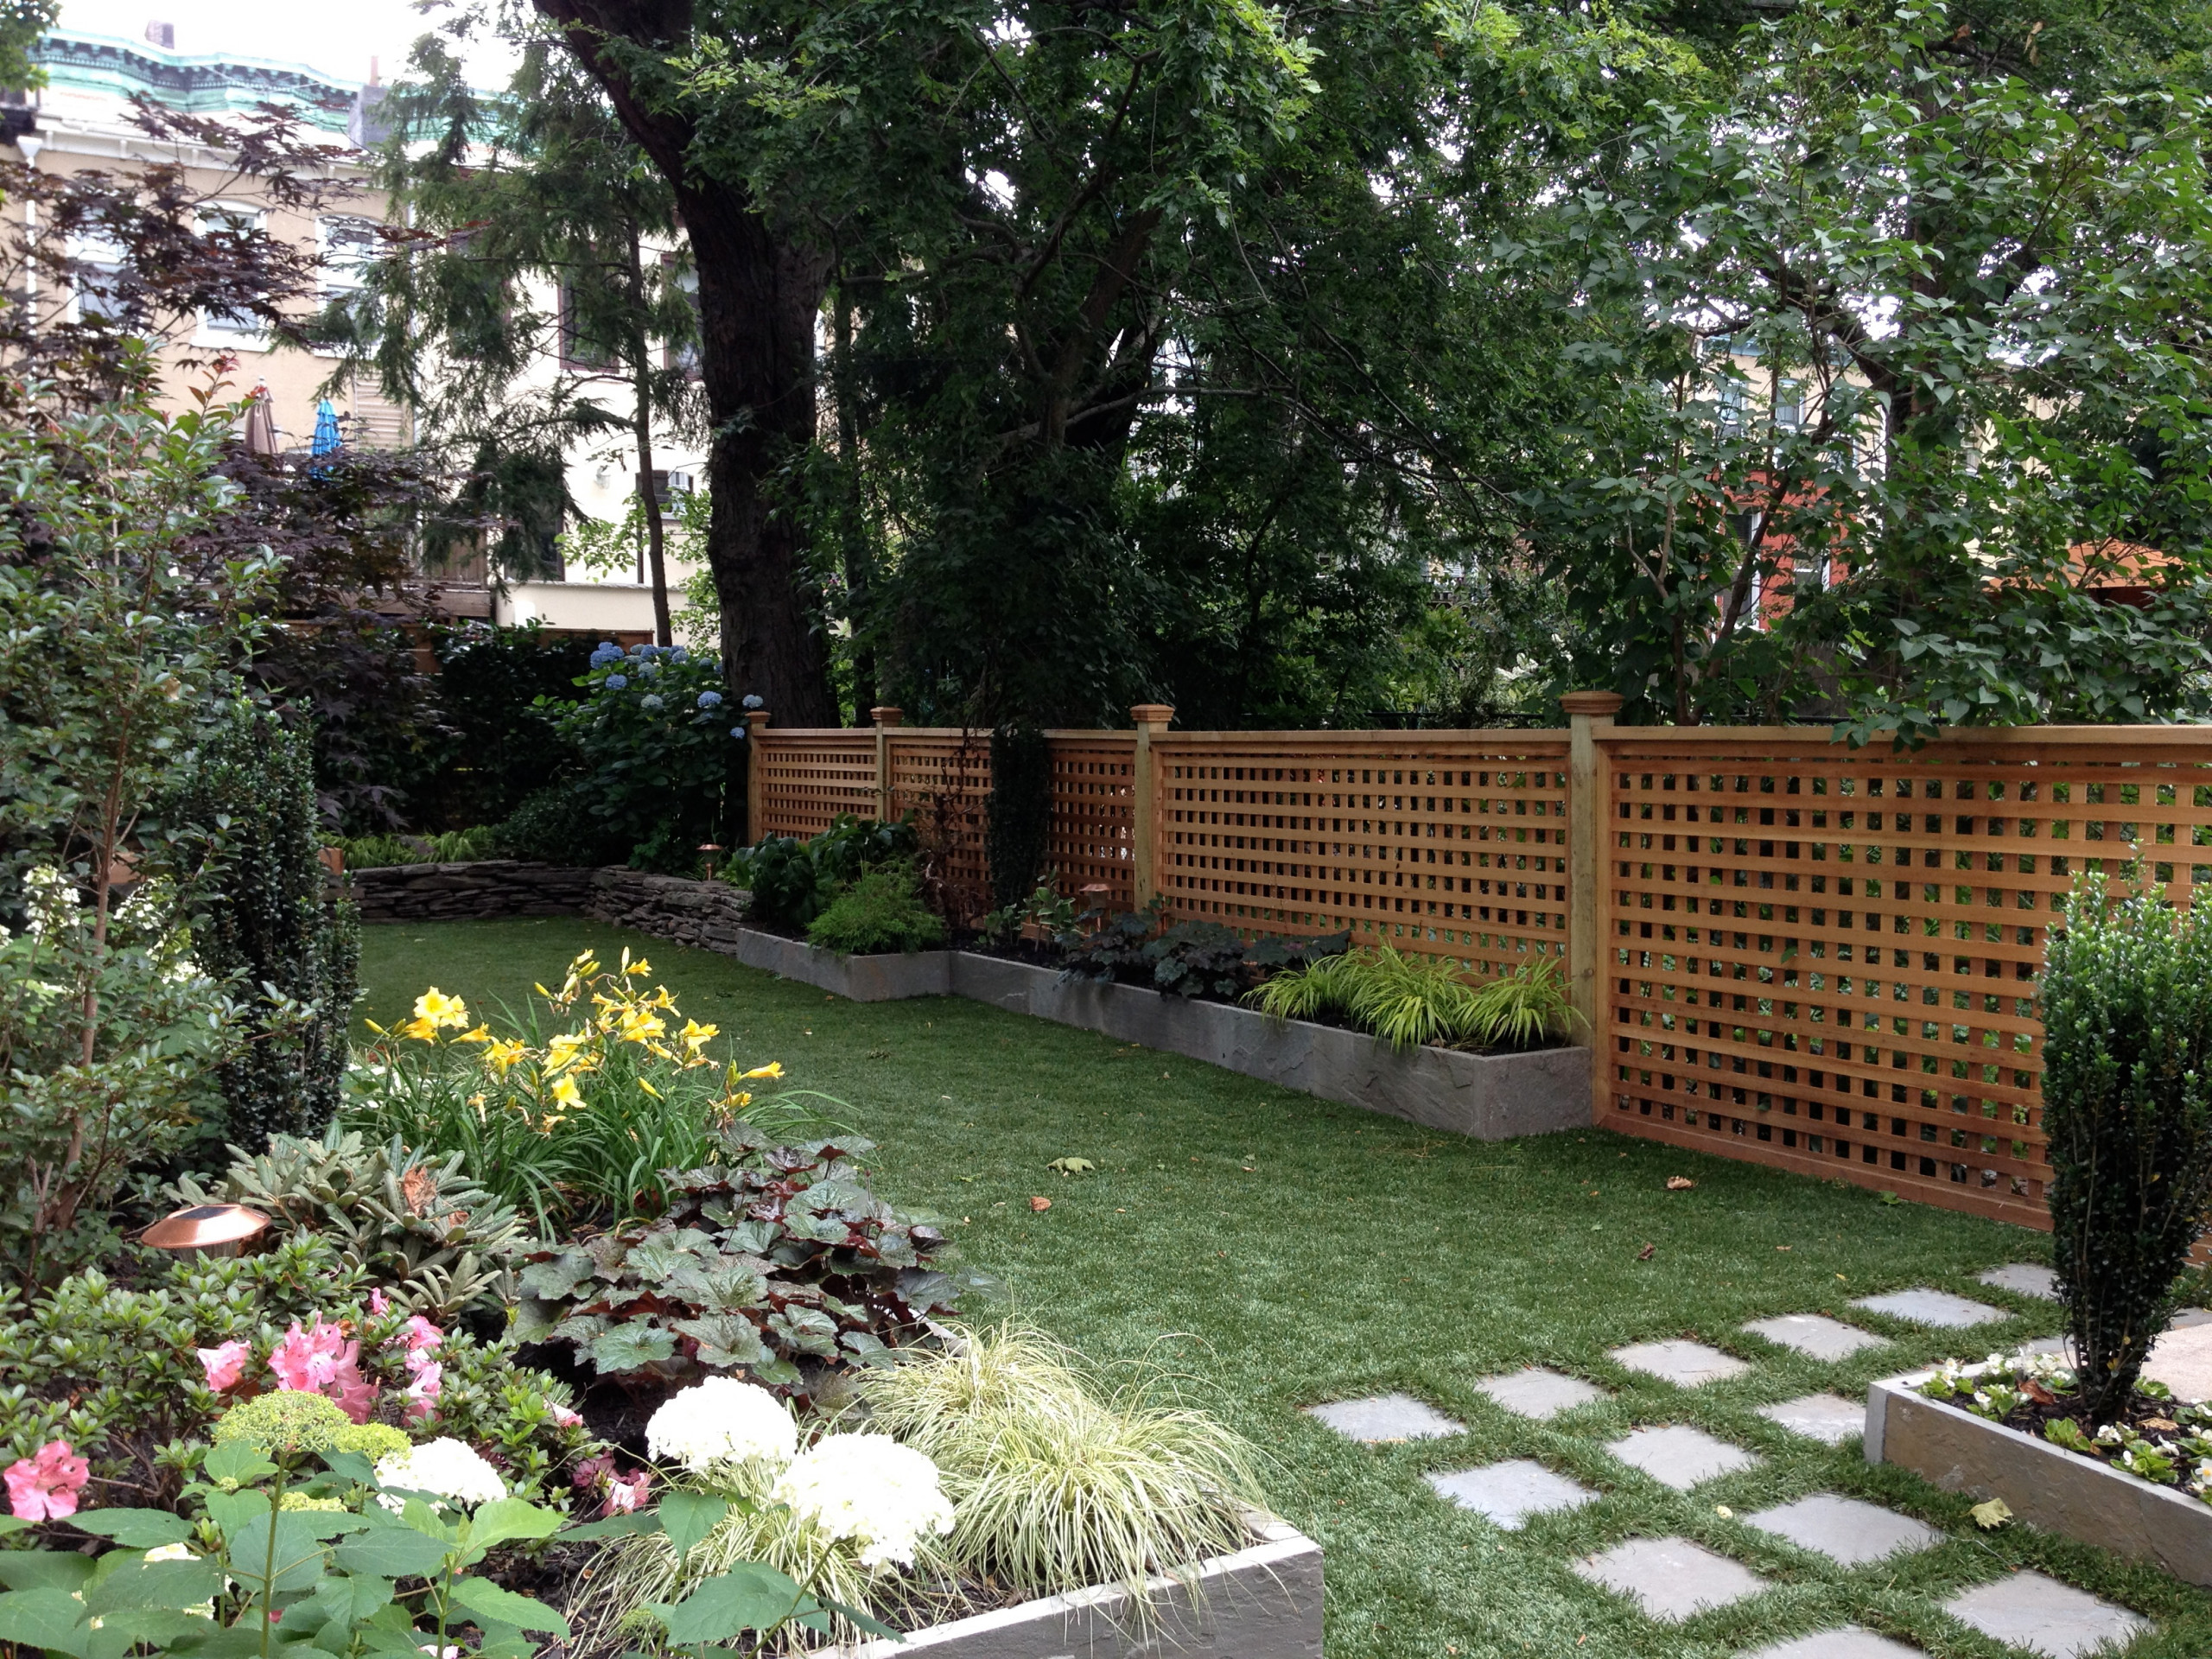 Synthetic Grass and Bluestone Raised Beds